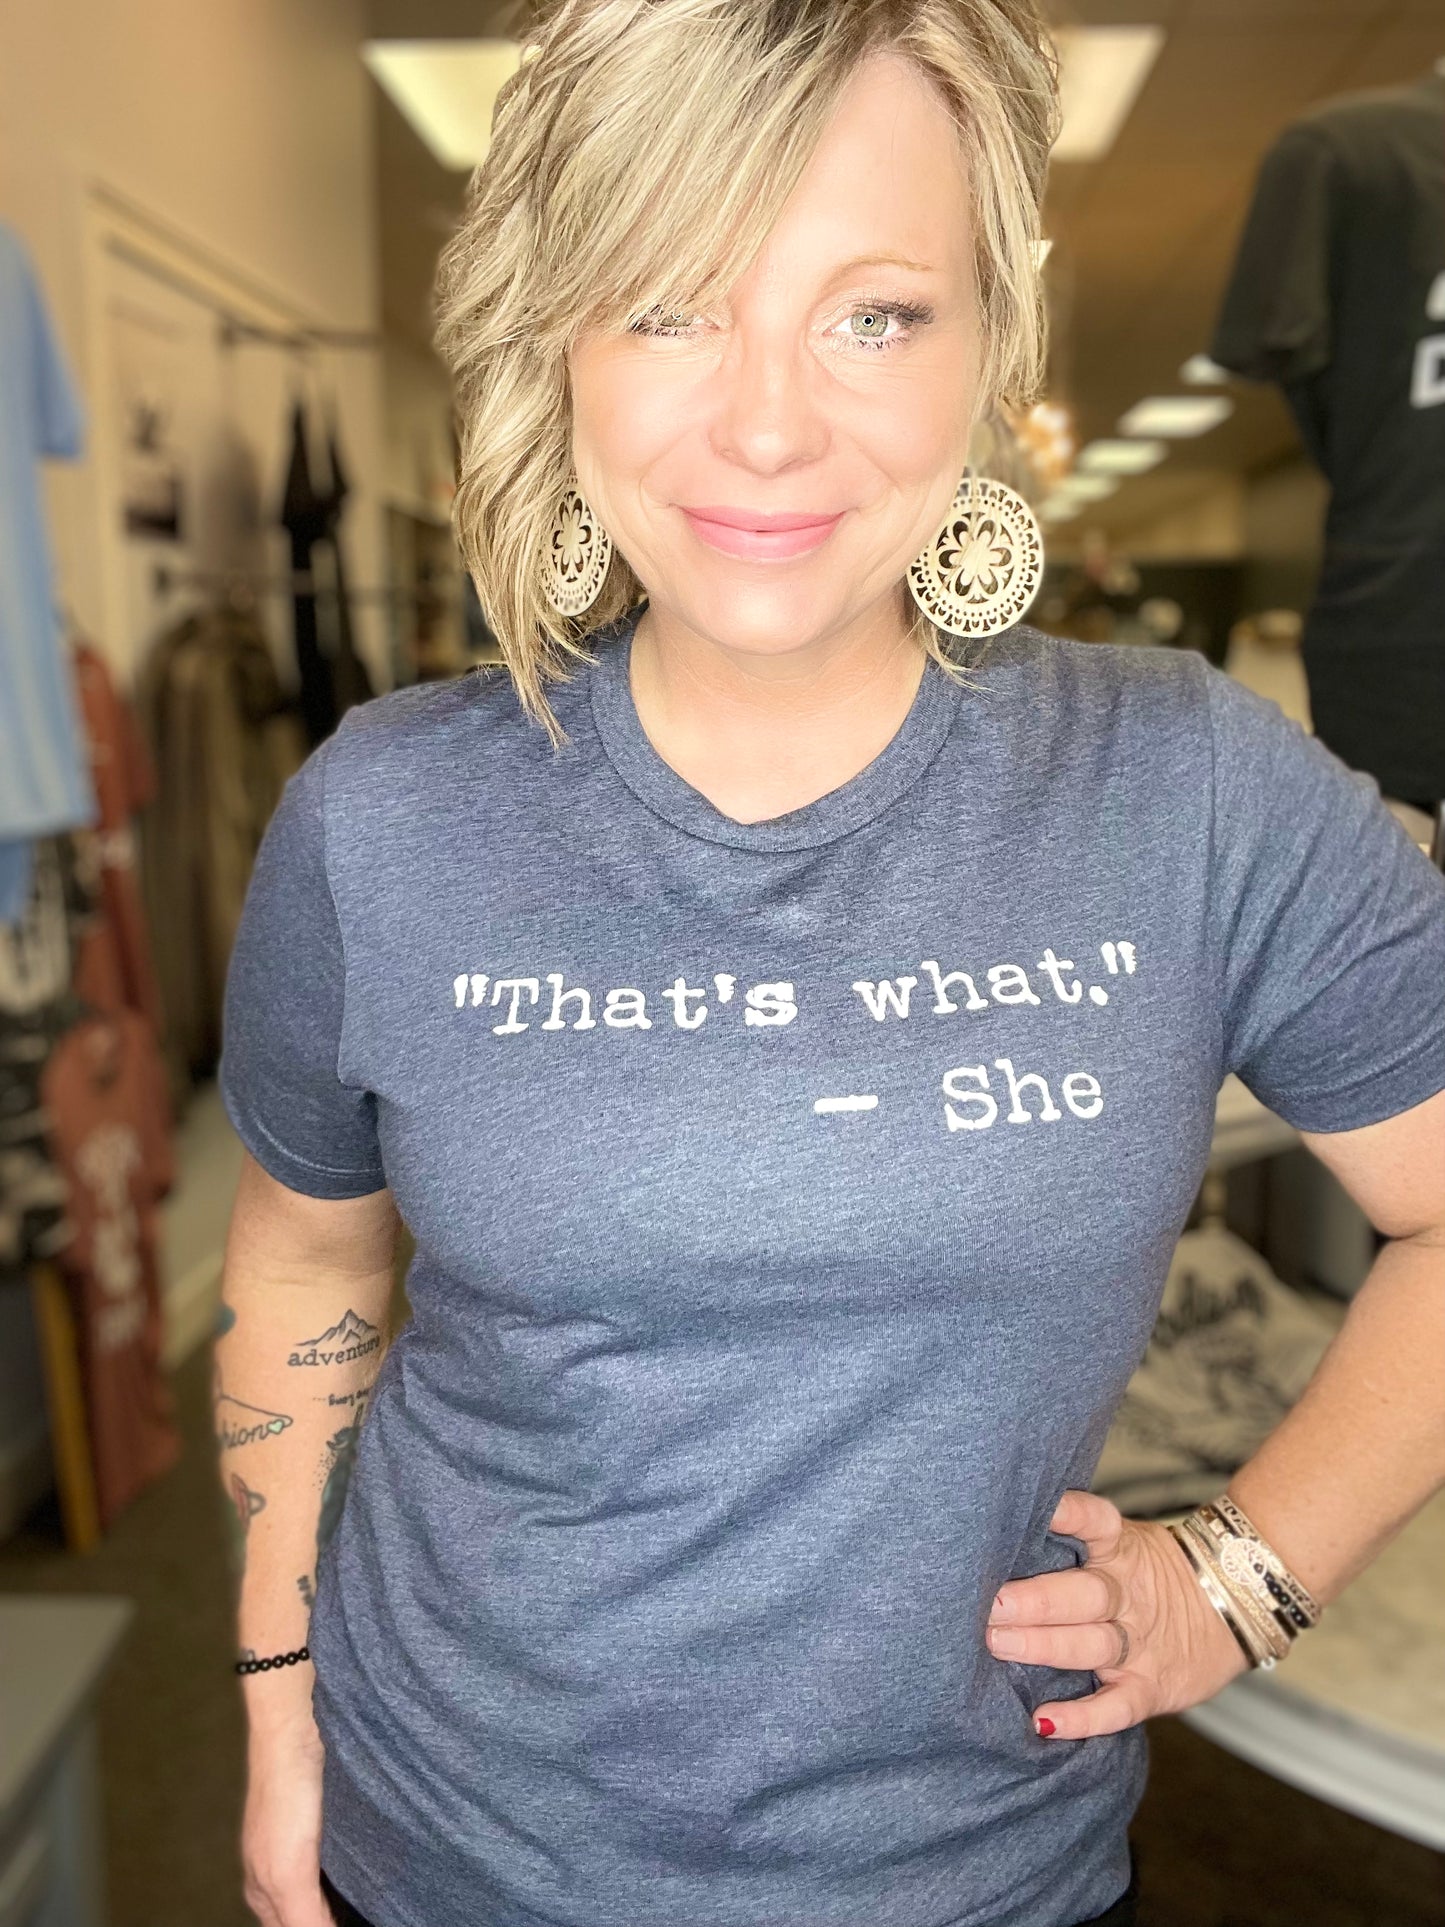 “That’s What” Tee